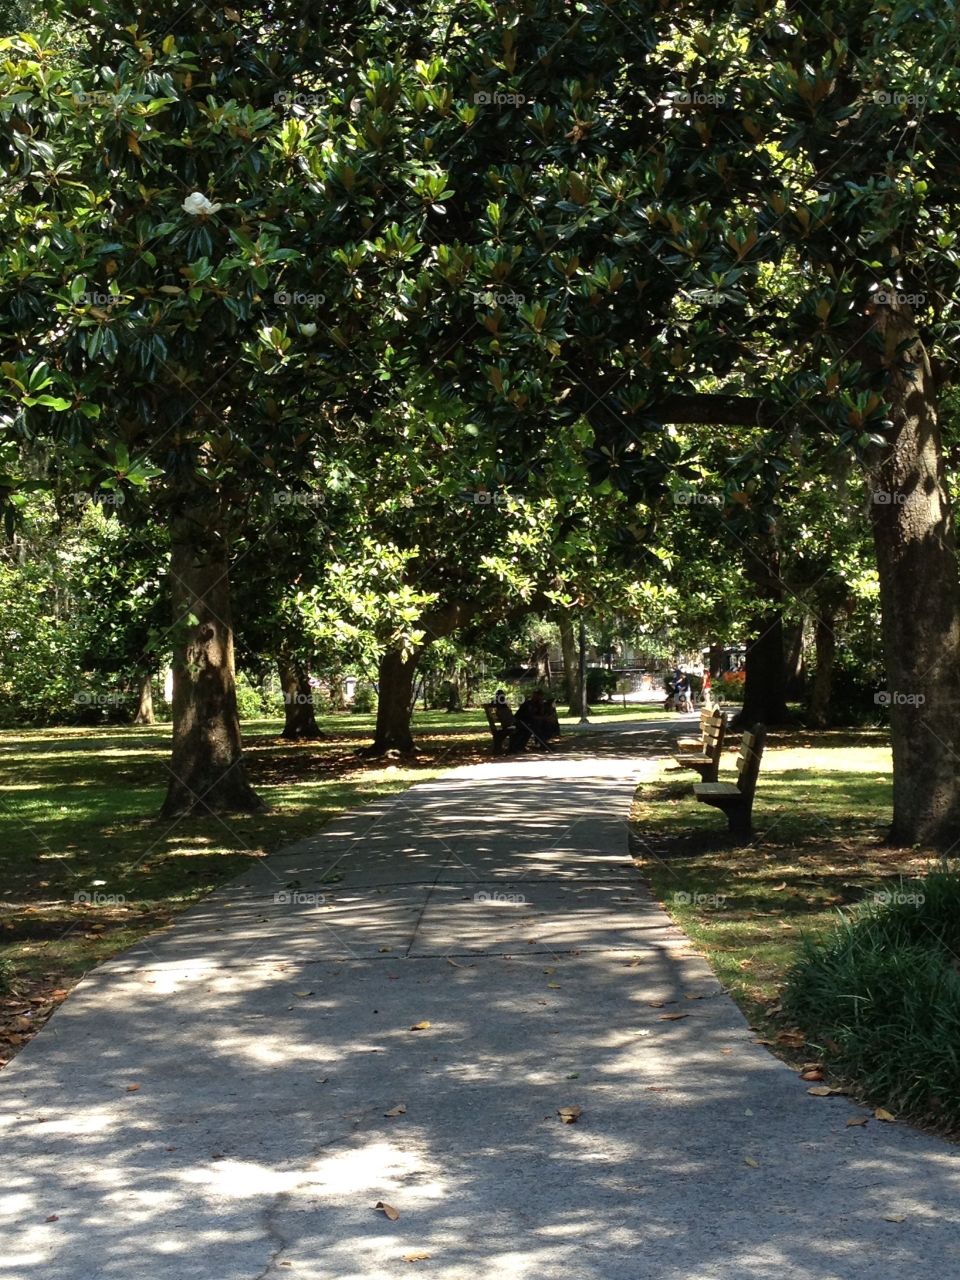 A shaded walking path through Forsyth Park, the largest park in the historic district of Savannah Georgia.